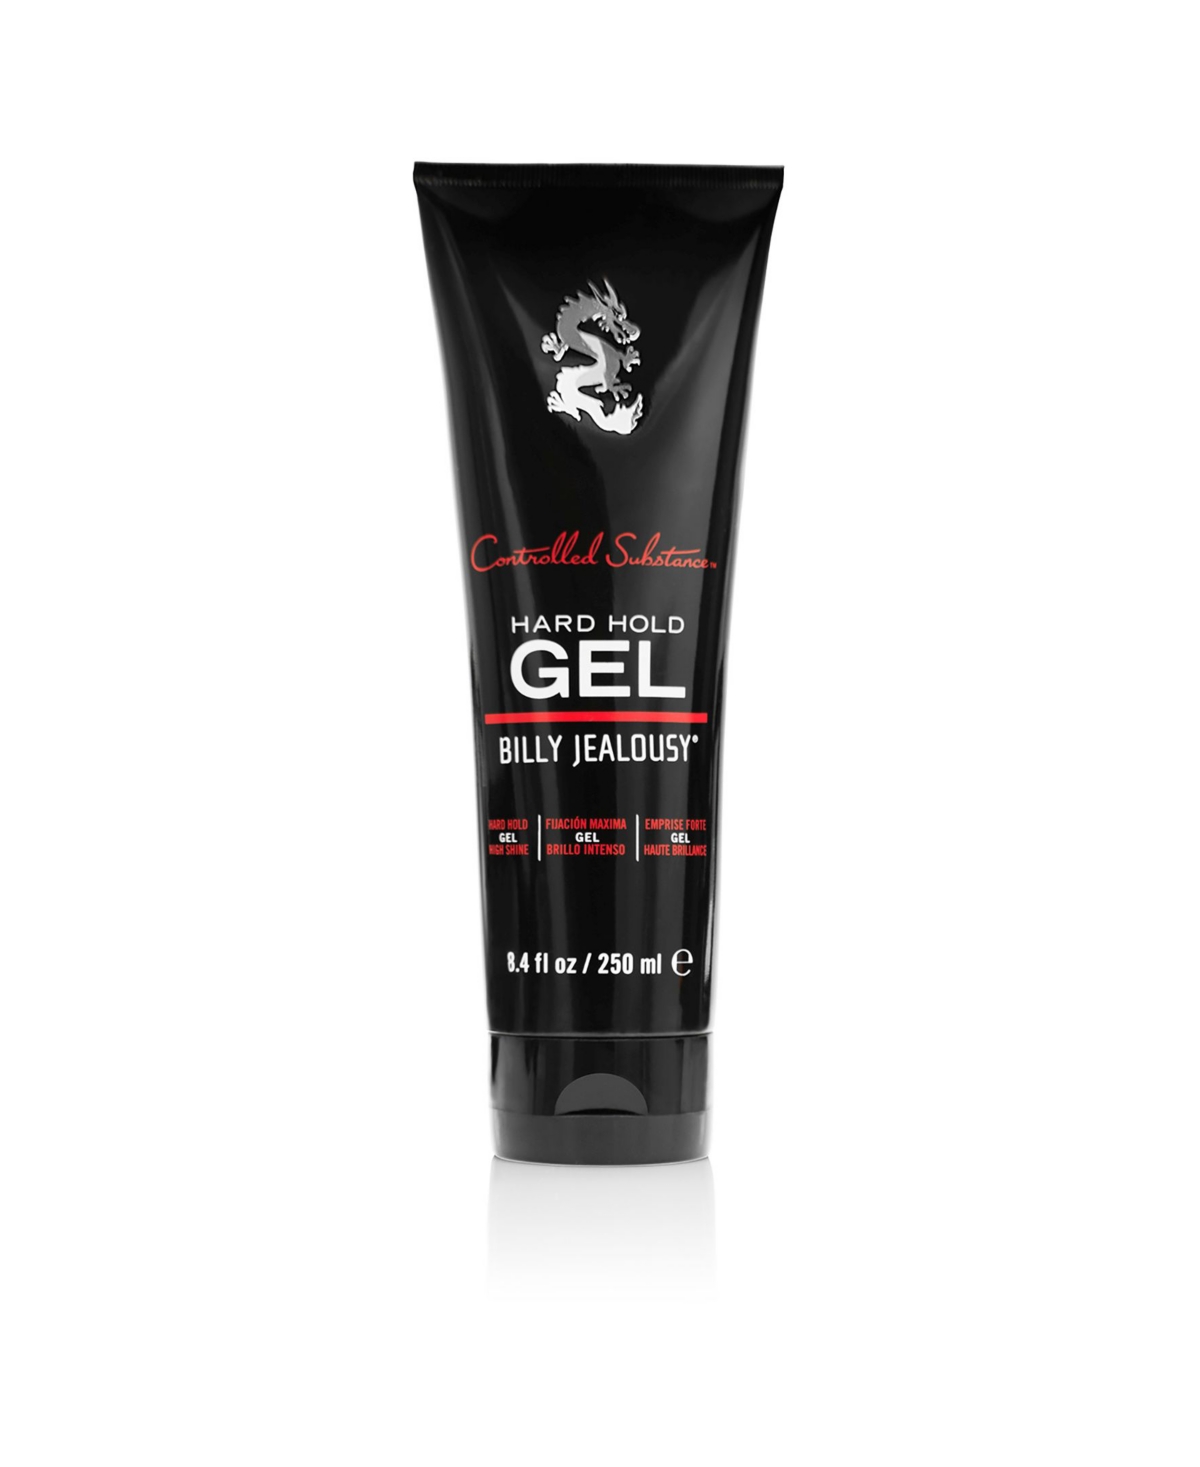 Controlled Substance Hard Hold Hair Gel, 8.4 Oz